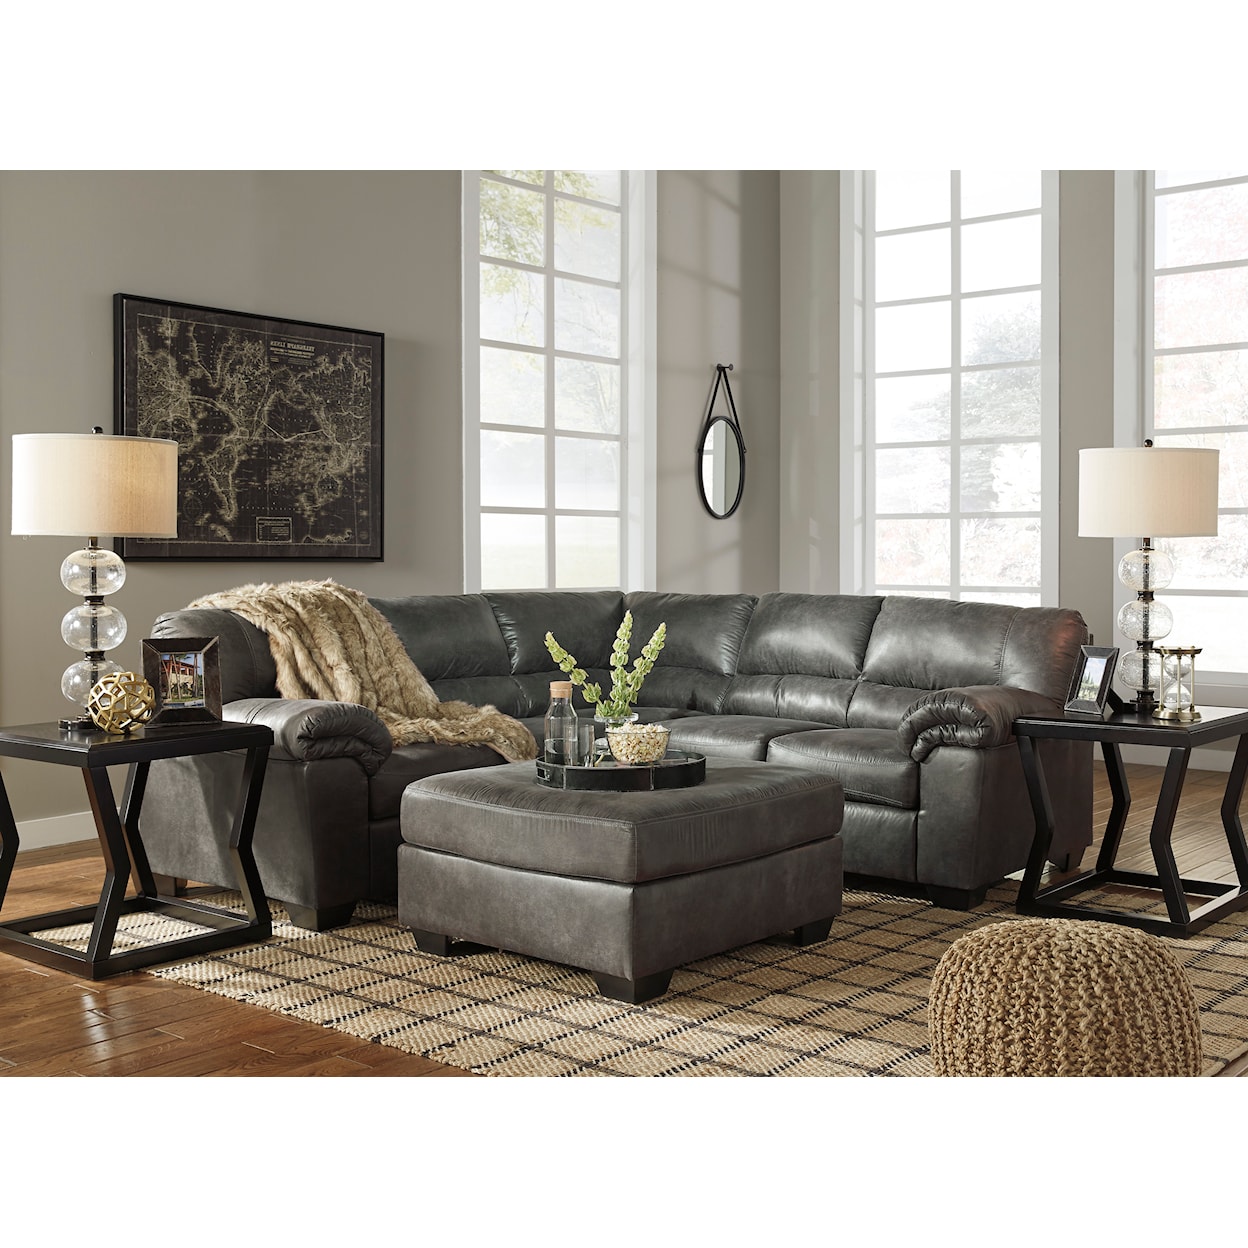 Signature Design by Ashley Furniture Bladen 2-Piece Sectional with Ottoman